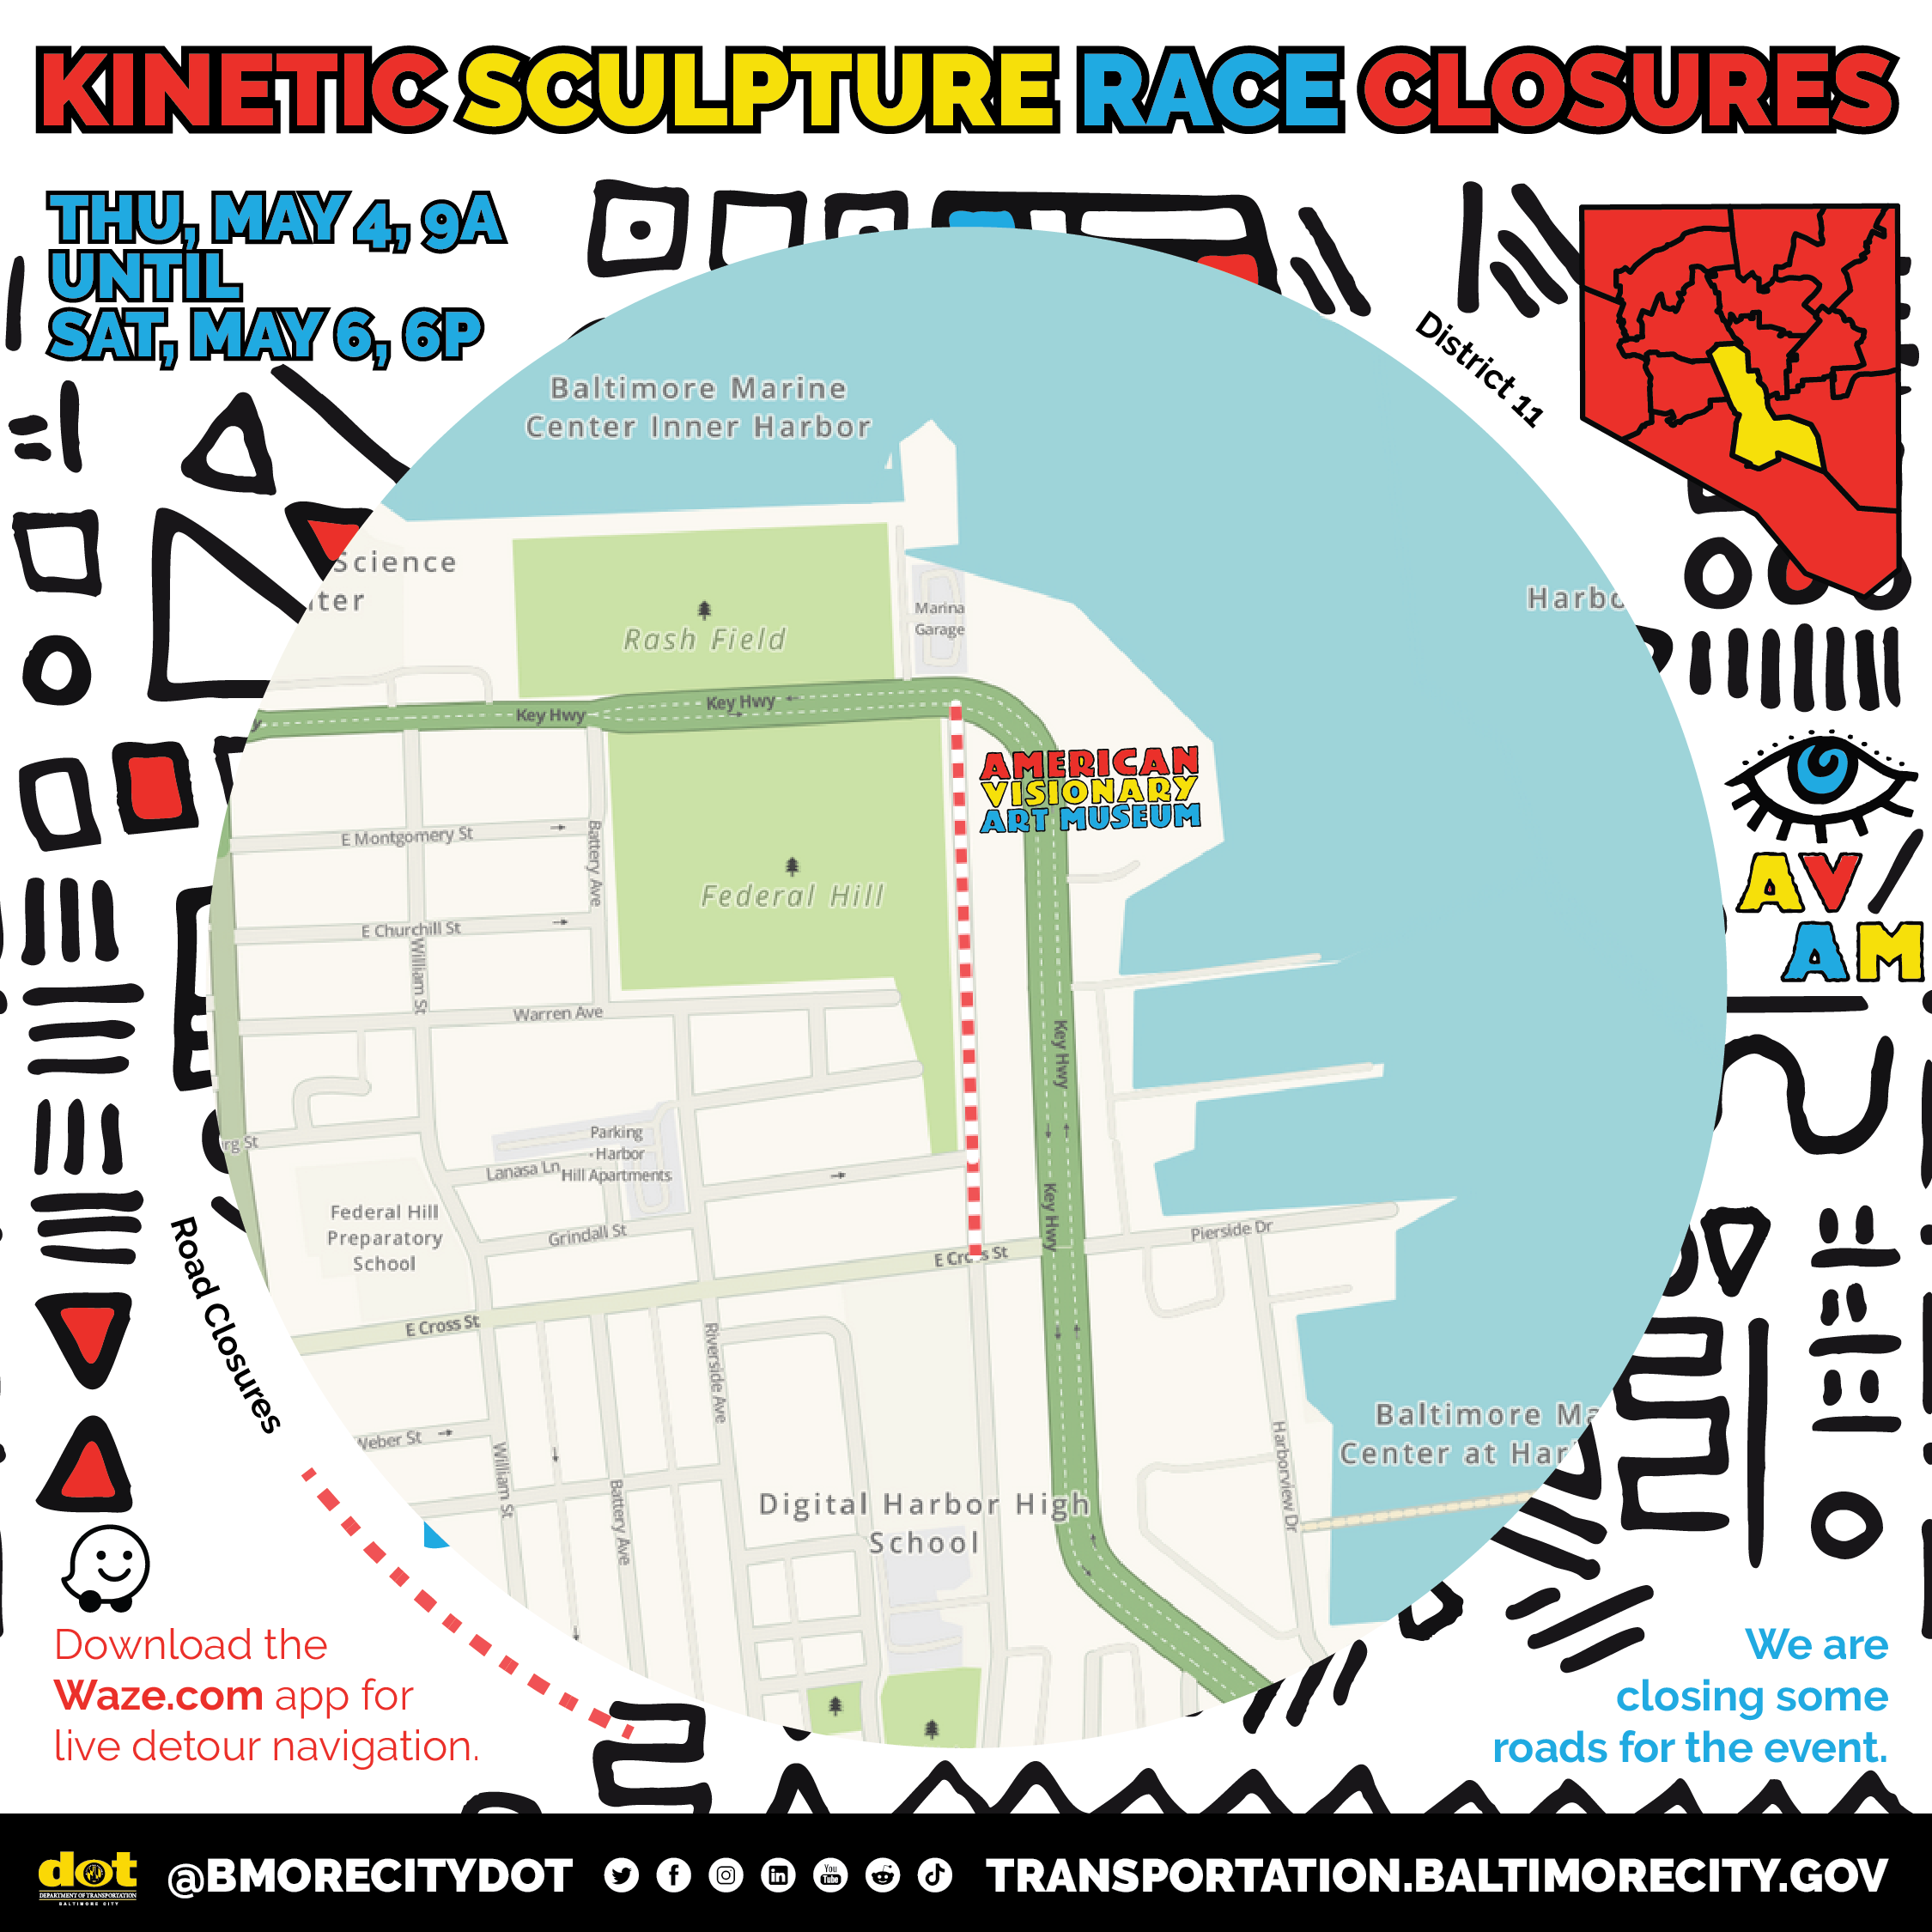 Map of road closures for the Kinetic Sculpture Race